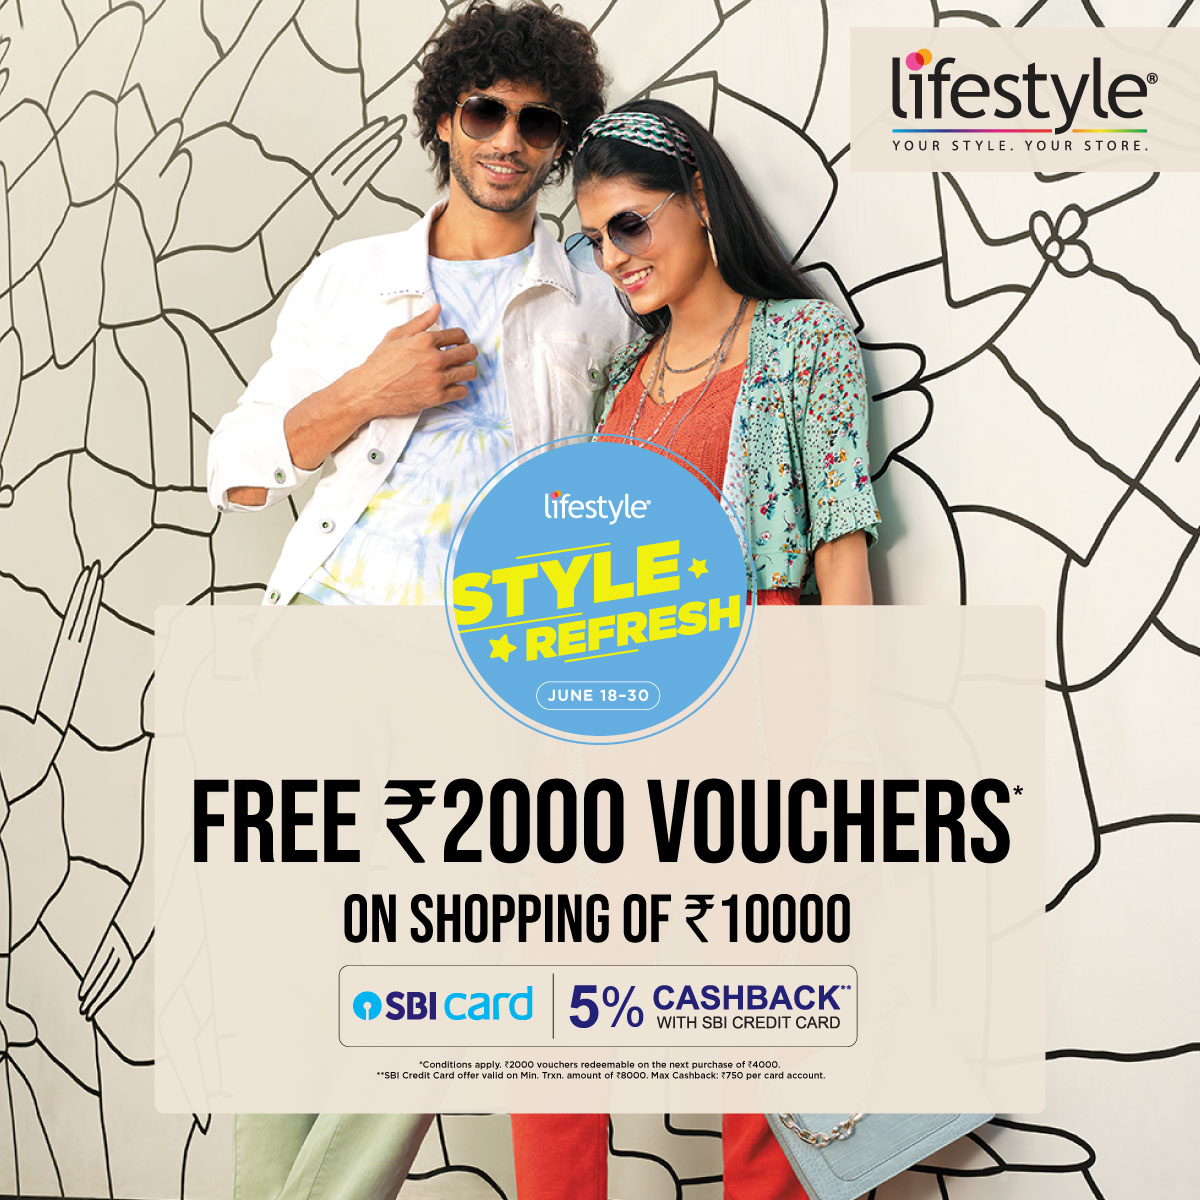 Lifestyle presents #StyleRefresh – avail amazing offers on top trends in-stores from June 18-30th.
Shop for Rs.7000 get Rs.1000 Voucher redeemable on next purchase of Rs.4000.
Shop for Rs.10,000 get 2 vouchers of Rs.1000, redeemable on next purchase of Rs.4000 each. T&C Apply.